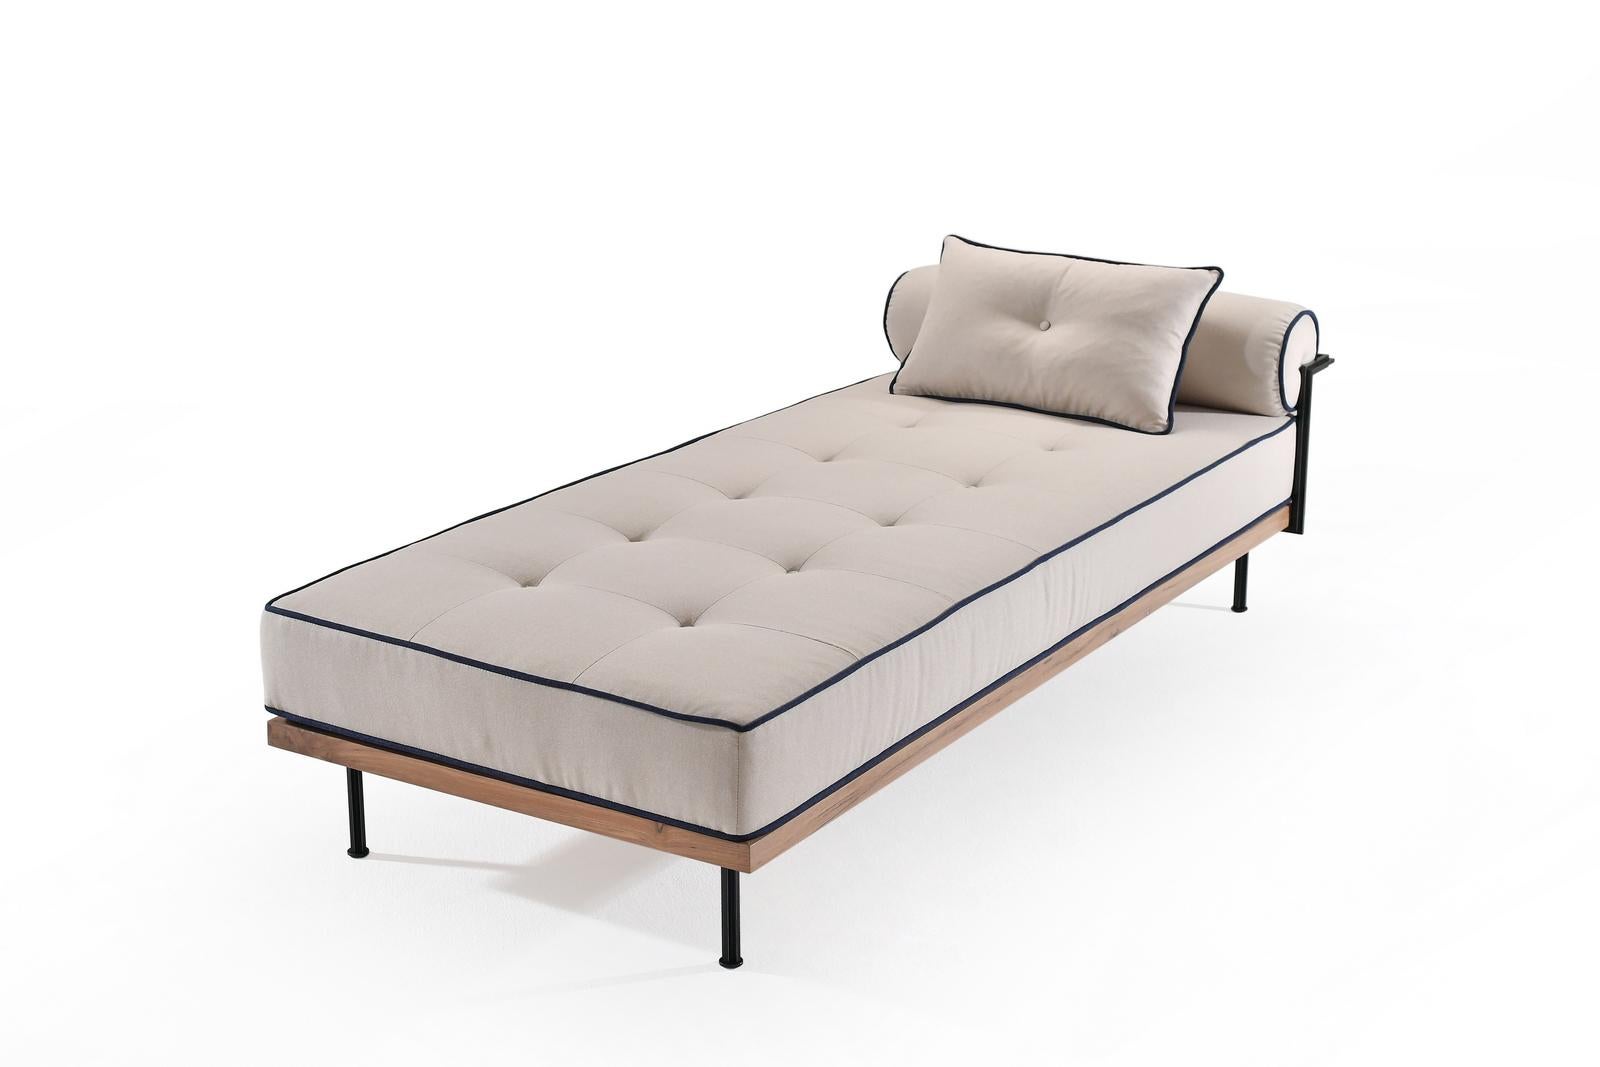 We recently created this daybed for the client of an interior designer in Massachusetts. She sent us her own fabric to create a daybed in beige with contrasting pipings in navy blue. 
let us know how we can help you, we’d be glad to put our creative